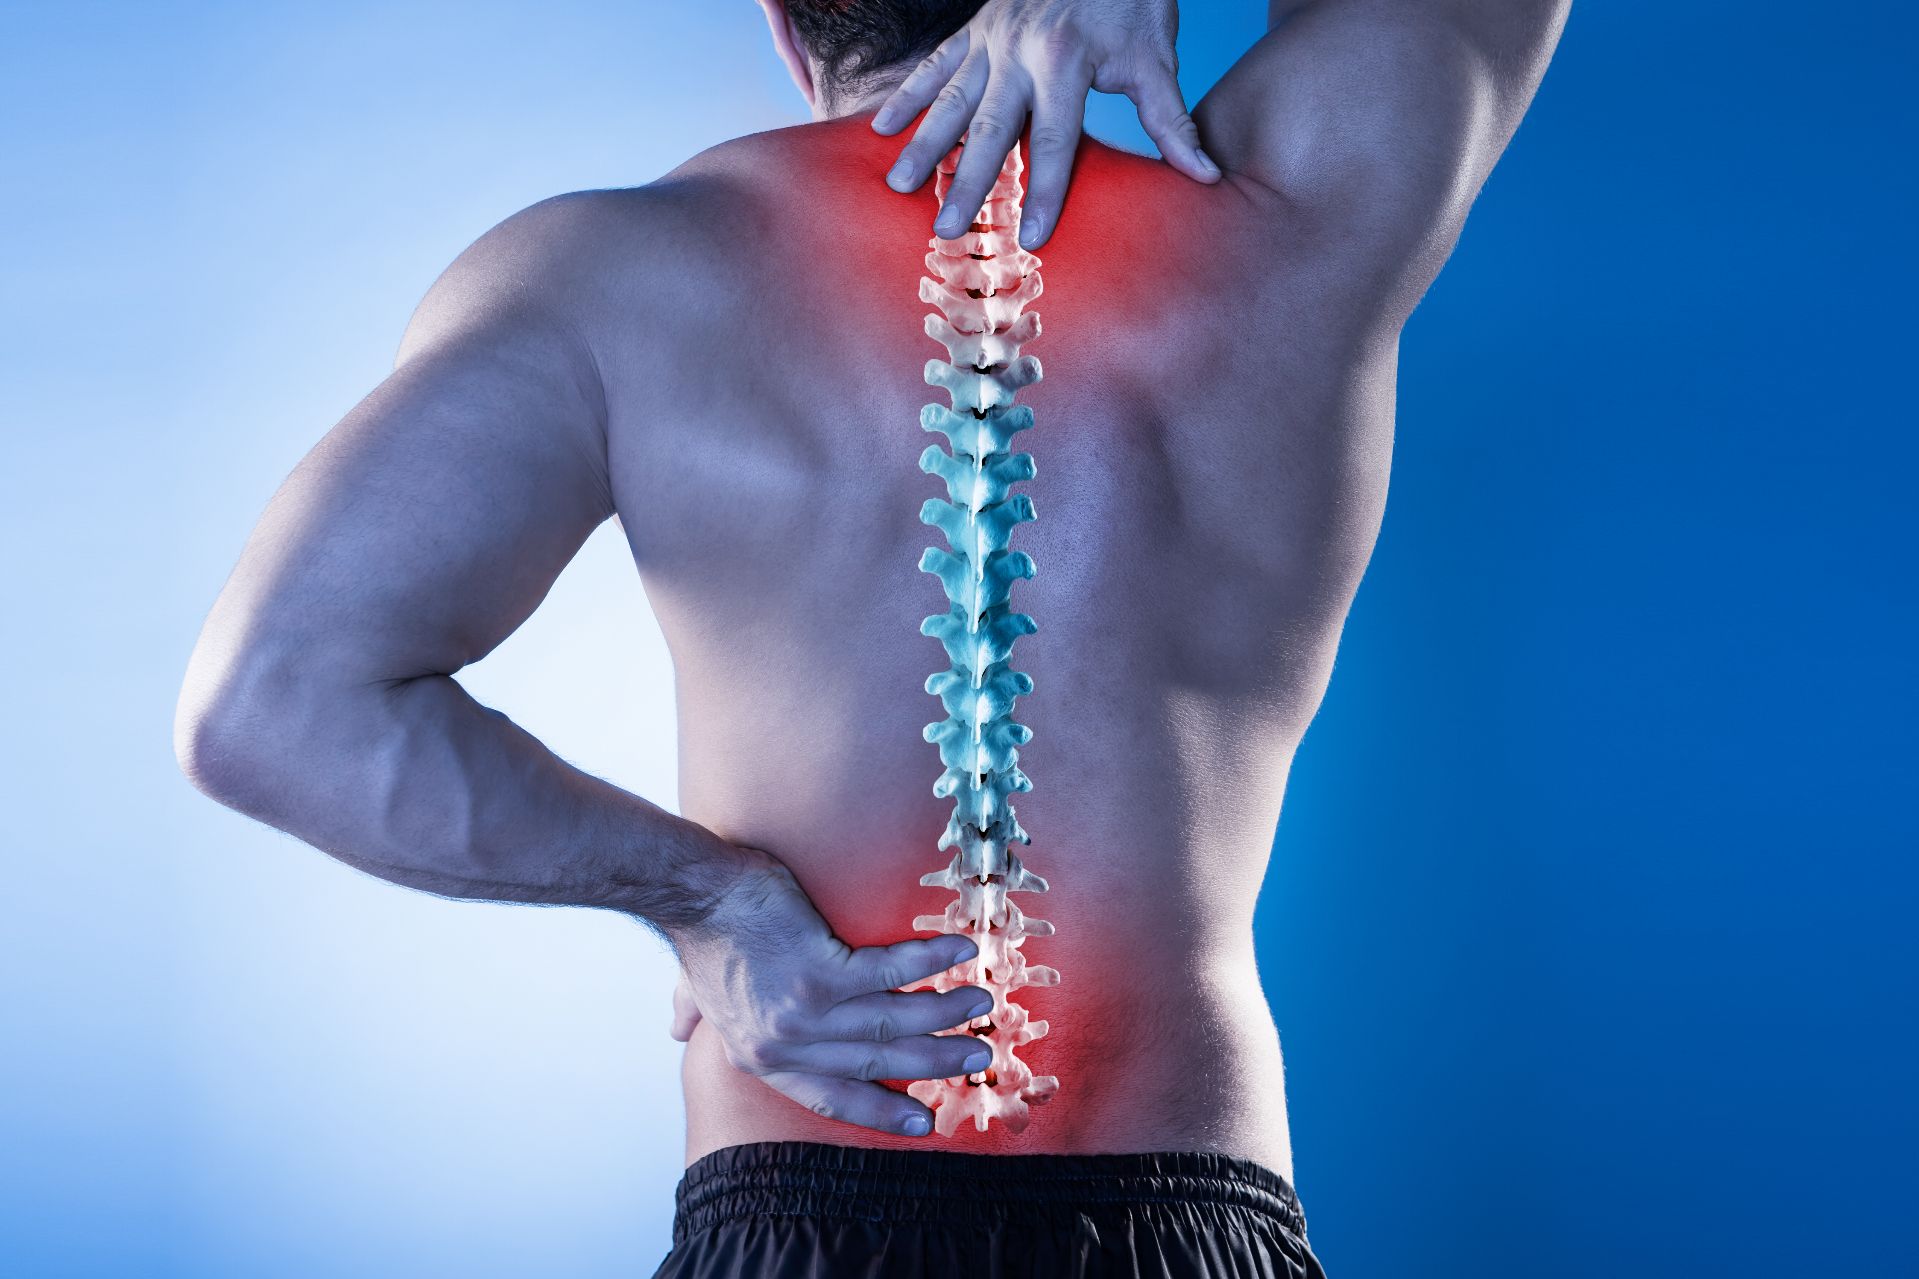 Back Pain and MRI Scans: What You Need to Know